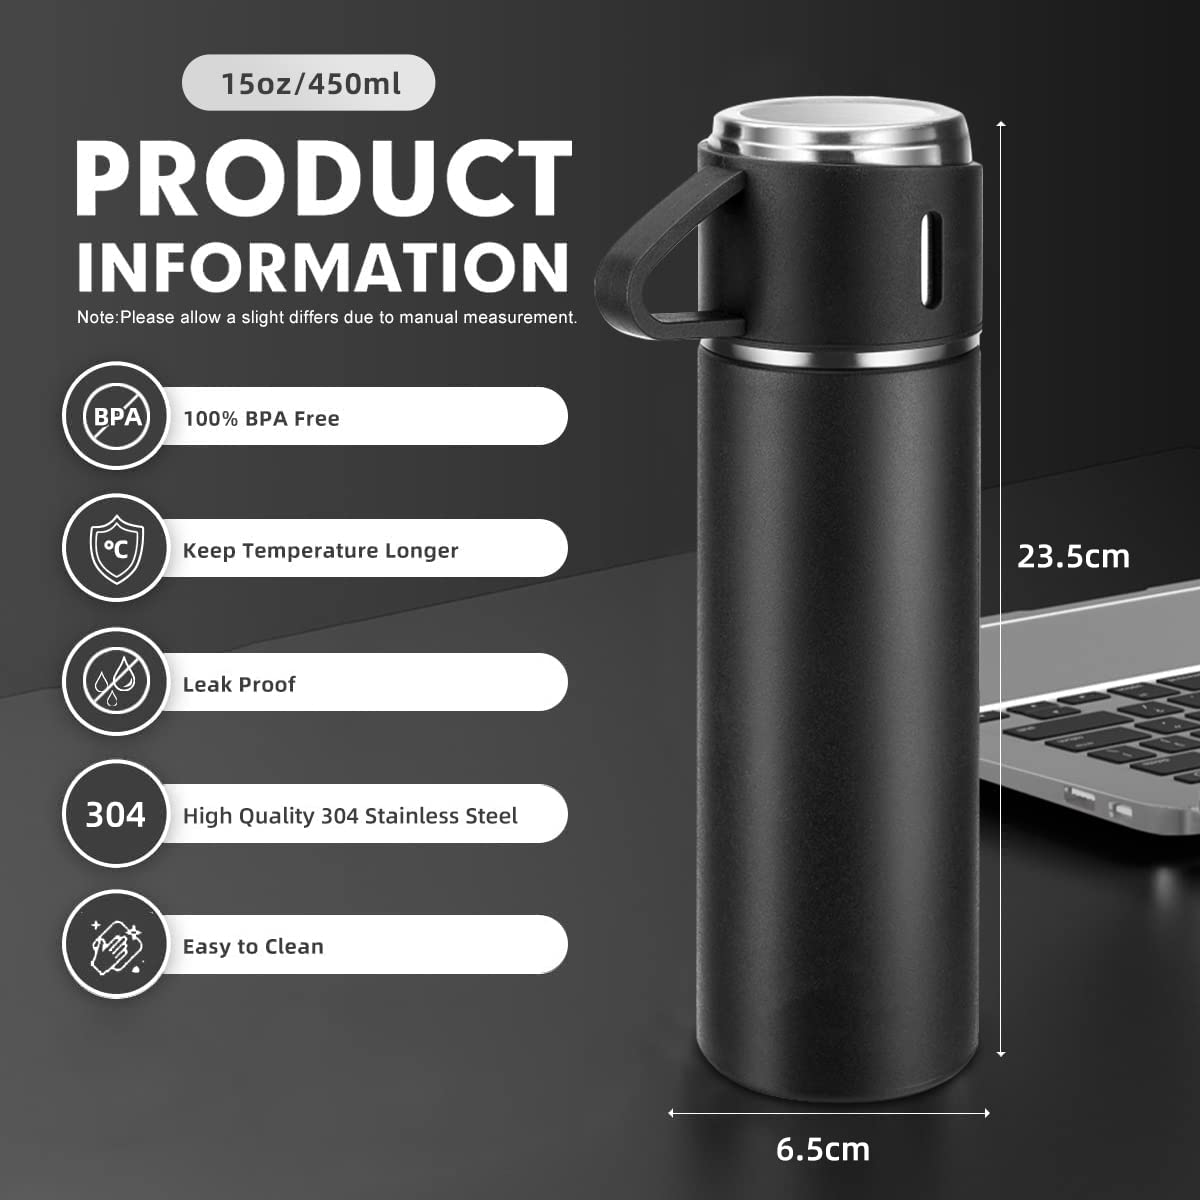 Coffee Thermos Stainless Steel Vacuum-Insulated Water Bottle, 500ml/16.9oz Insulated Bottle with Cup for Hot & Cold Drink Travel Mug (Black, Three Cup)